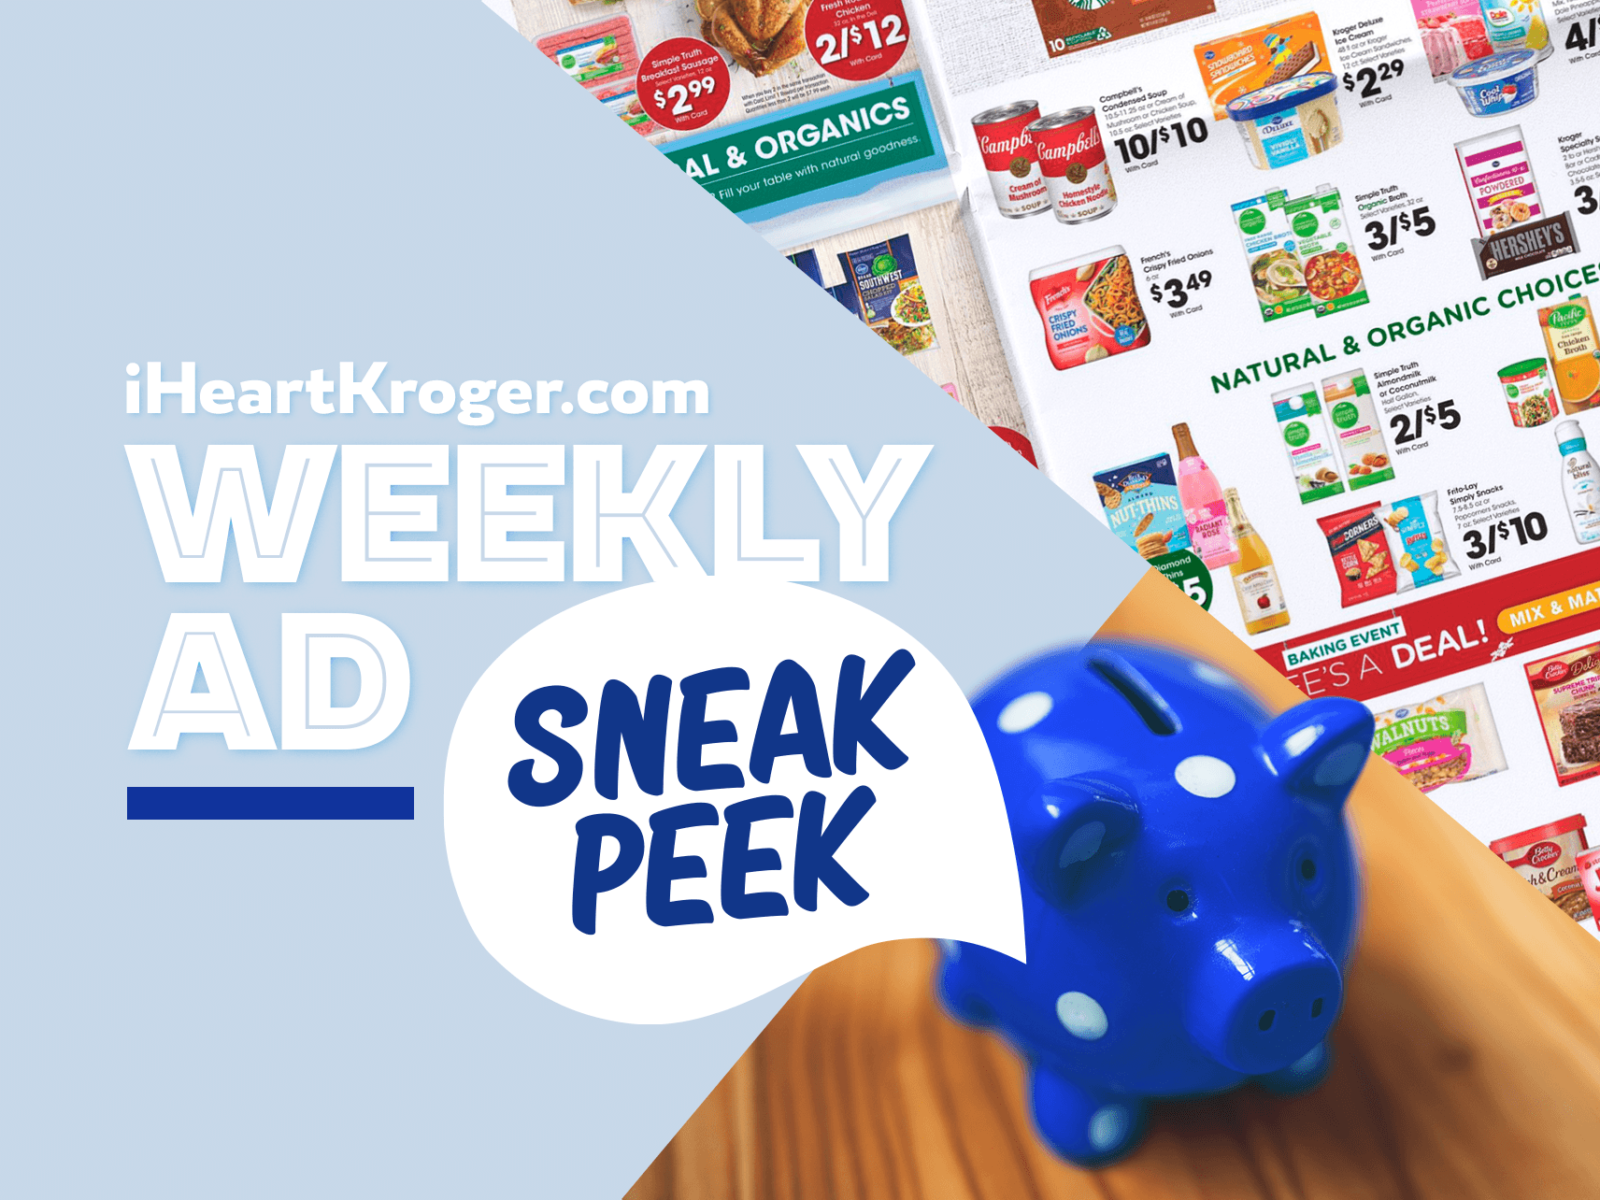 Kroger Ad & Coupons Week Of 5/25 to 5/31